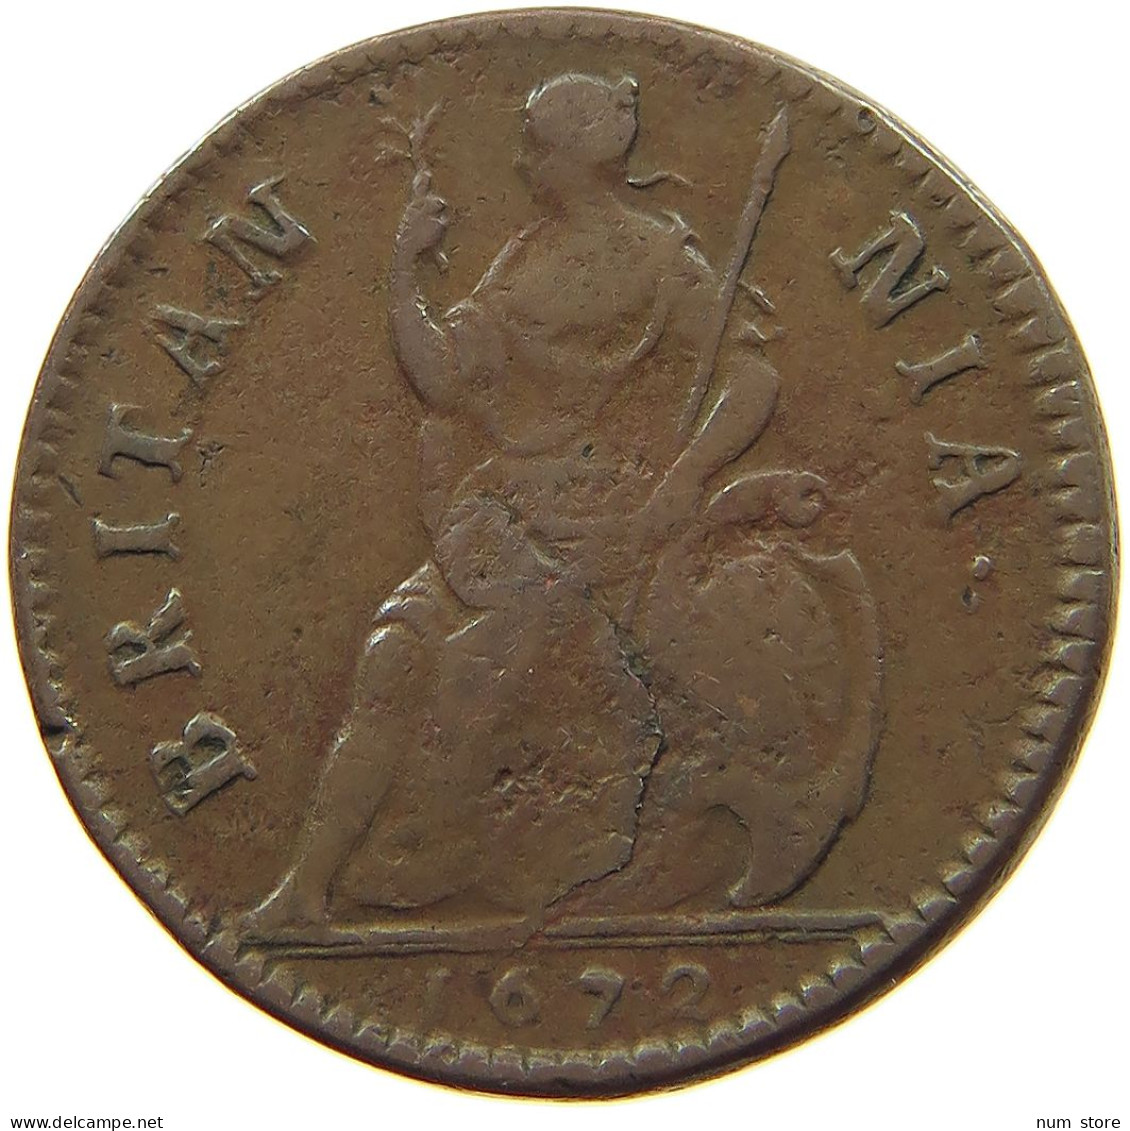 GREAT BRITAIN FARTHING 1672 CHARLES II. (1660-1685) #t149 0217 - A. 1 Farthing